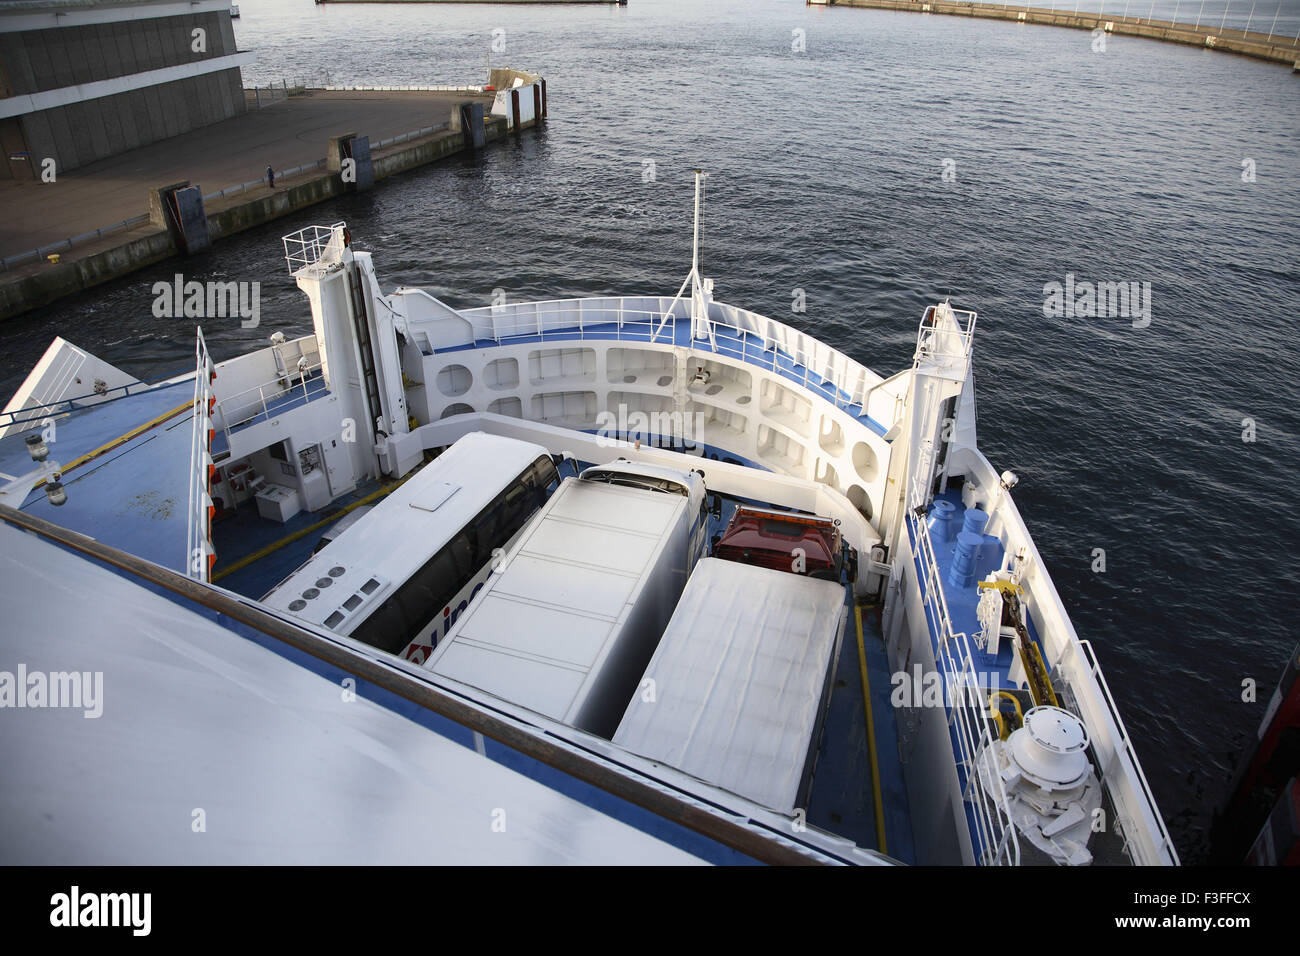 Ferry boat, Gothenburg, Vastra Gotaland County, Sweden, Nordic countries, Europe Stock Photo